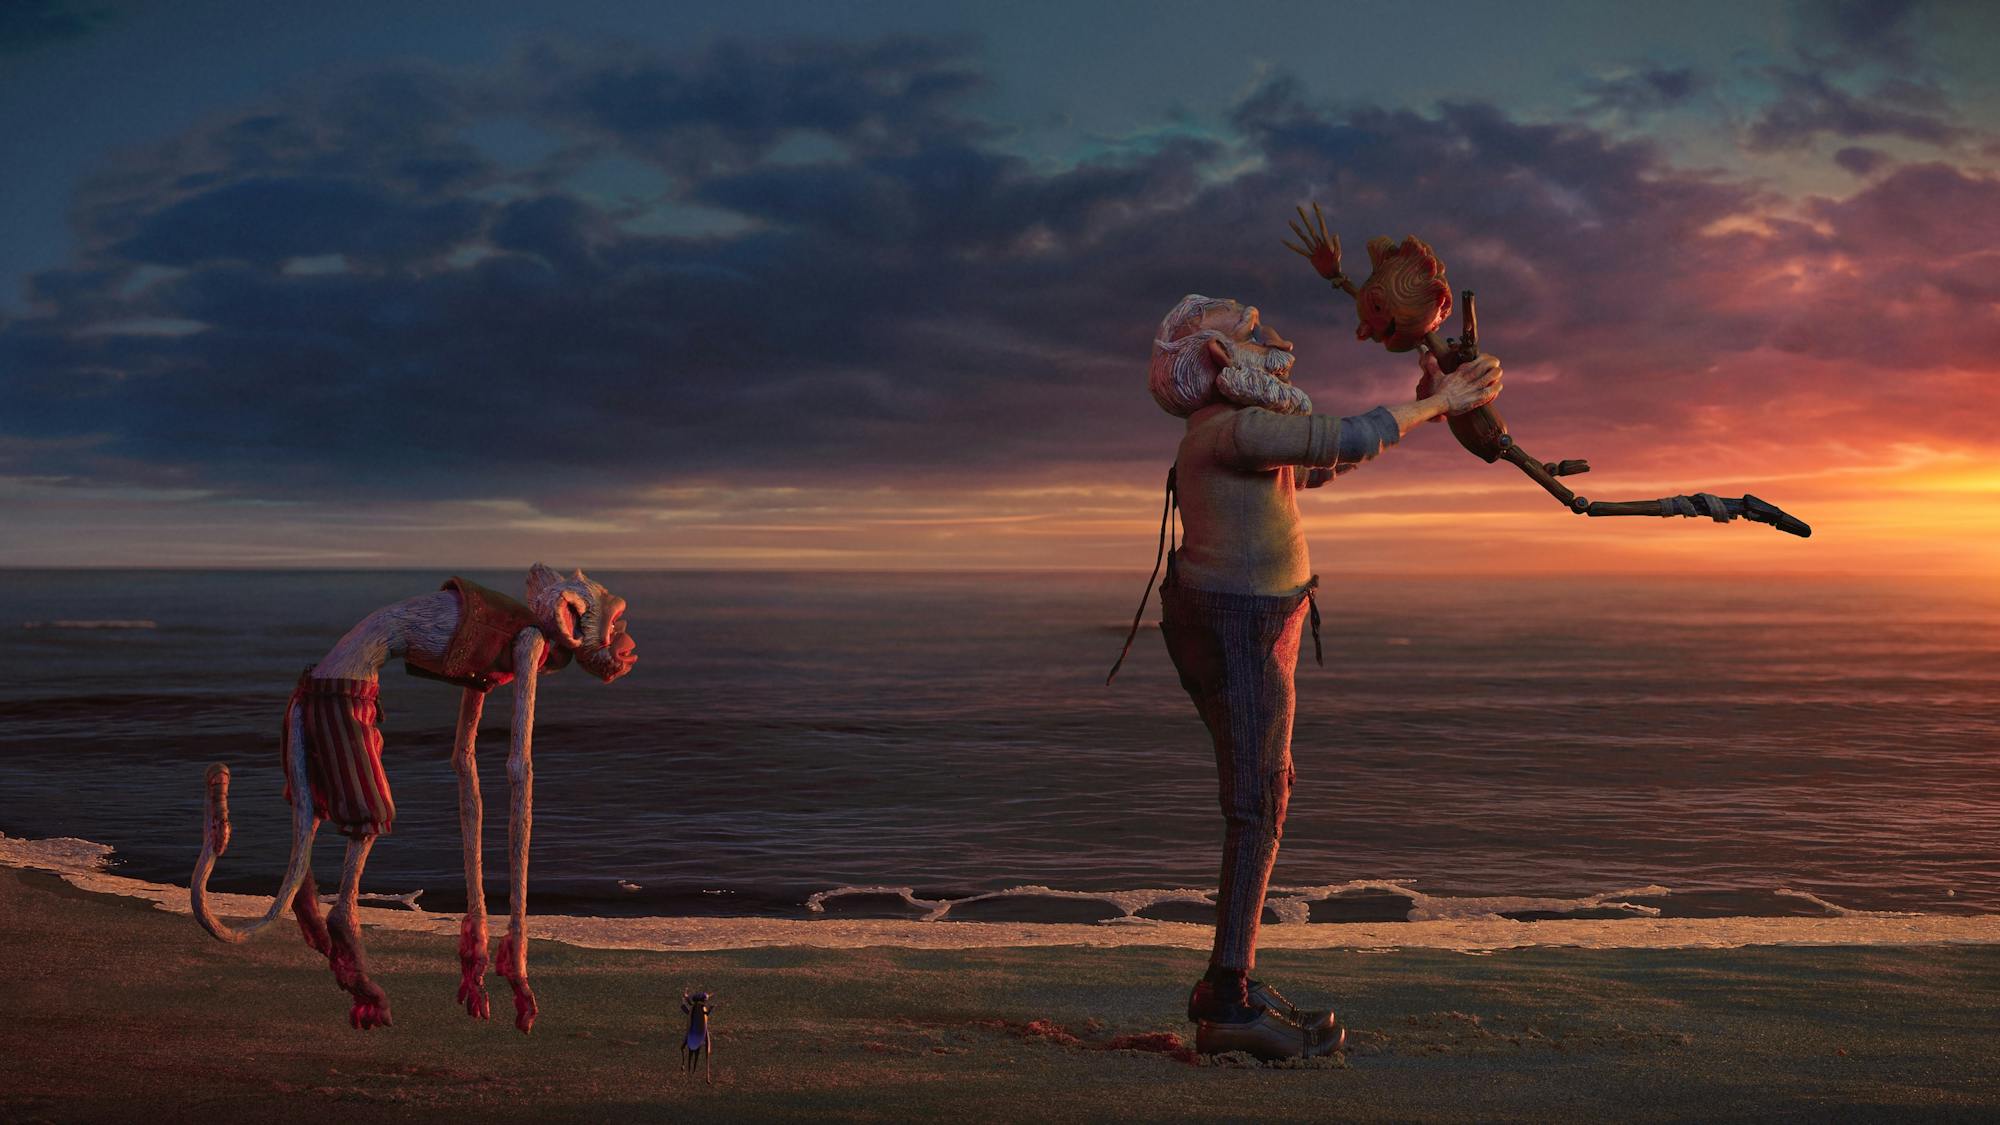 Spazzatura (Cate Blanchett) stands behind Geppetto (David Bradley) as he swings Pinocchio (Gregory Mann) into the air, lit by an orange-purple sunset.